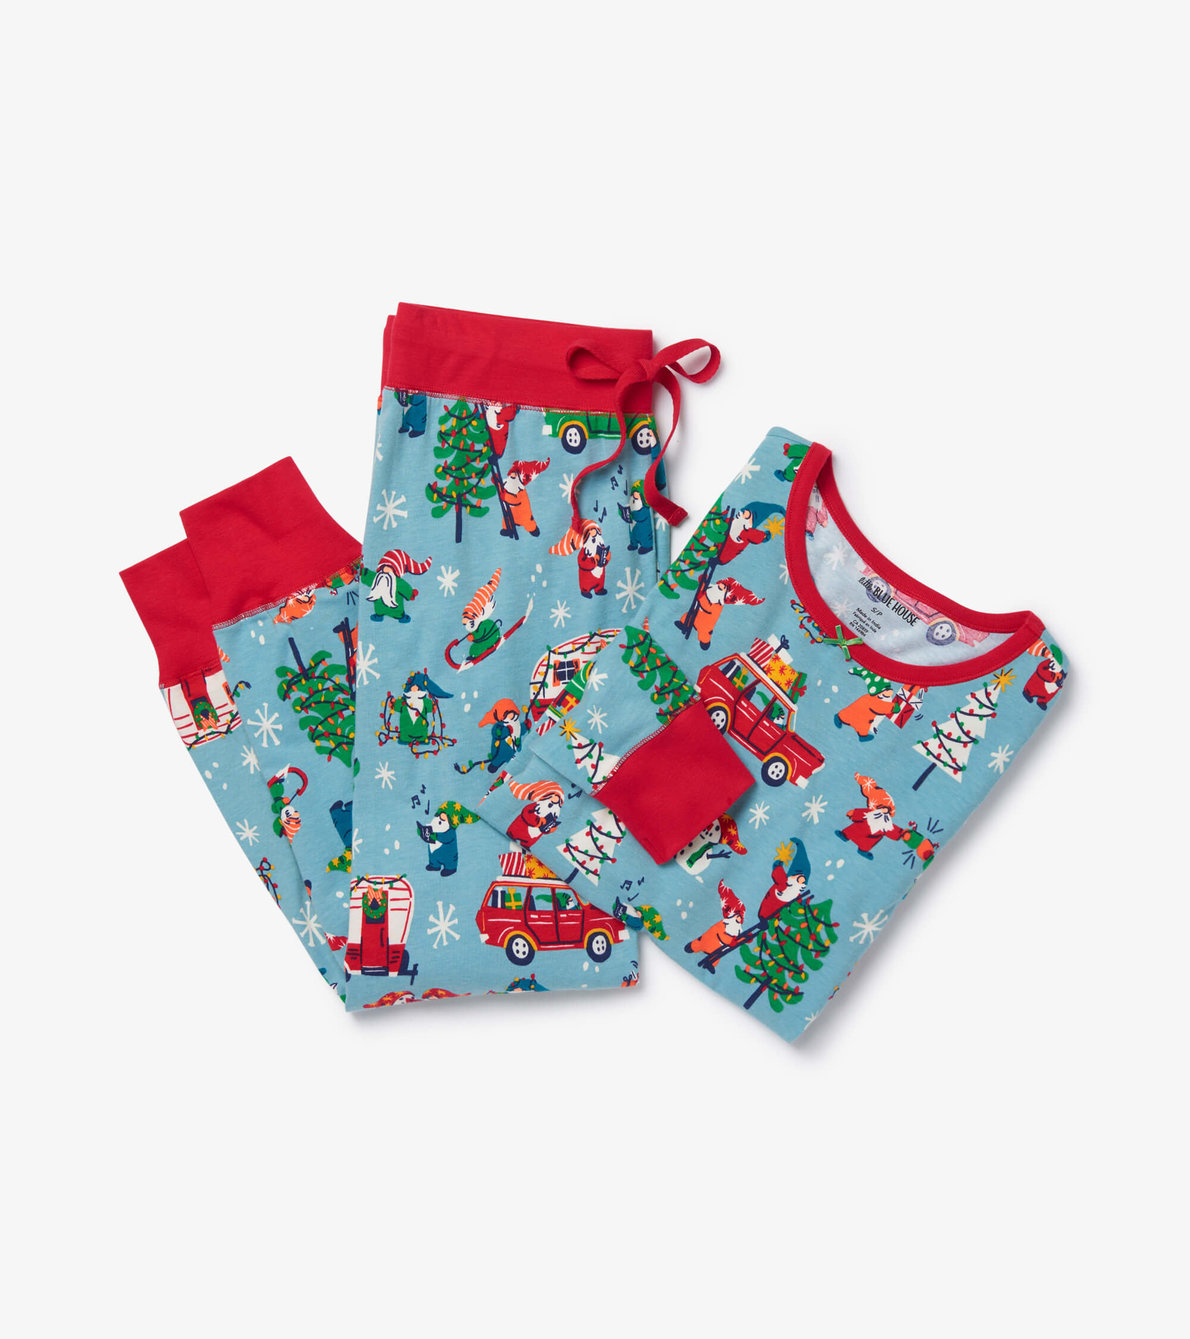 View larger image of Gnome For The Holidays Women's Jersey Pajama Set